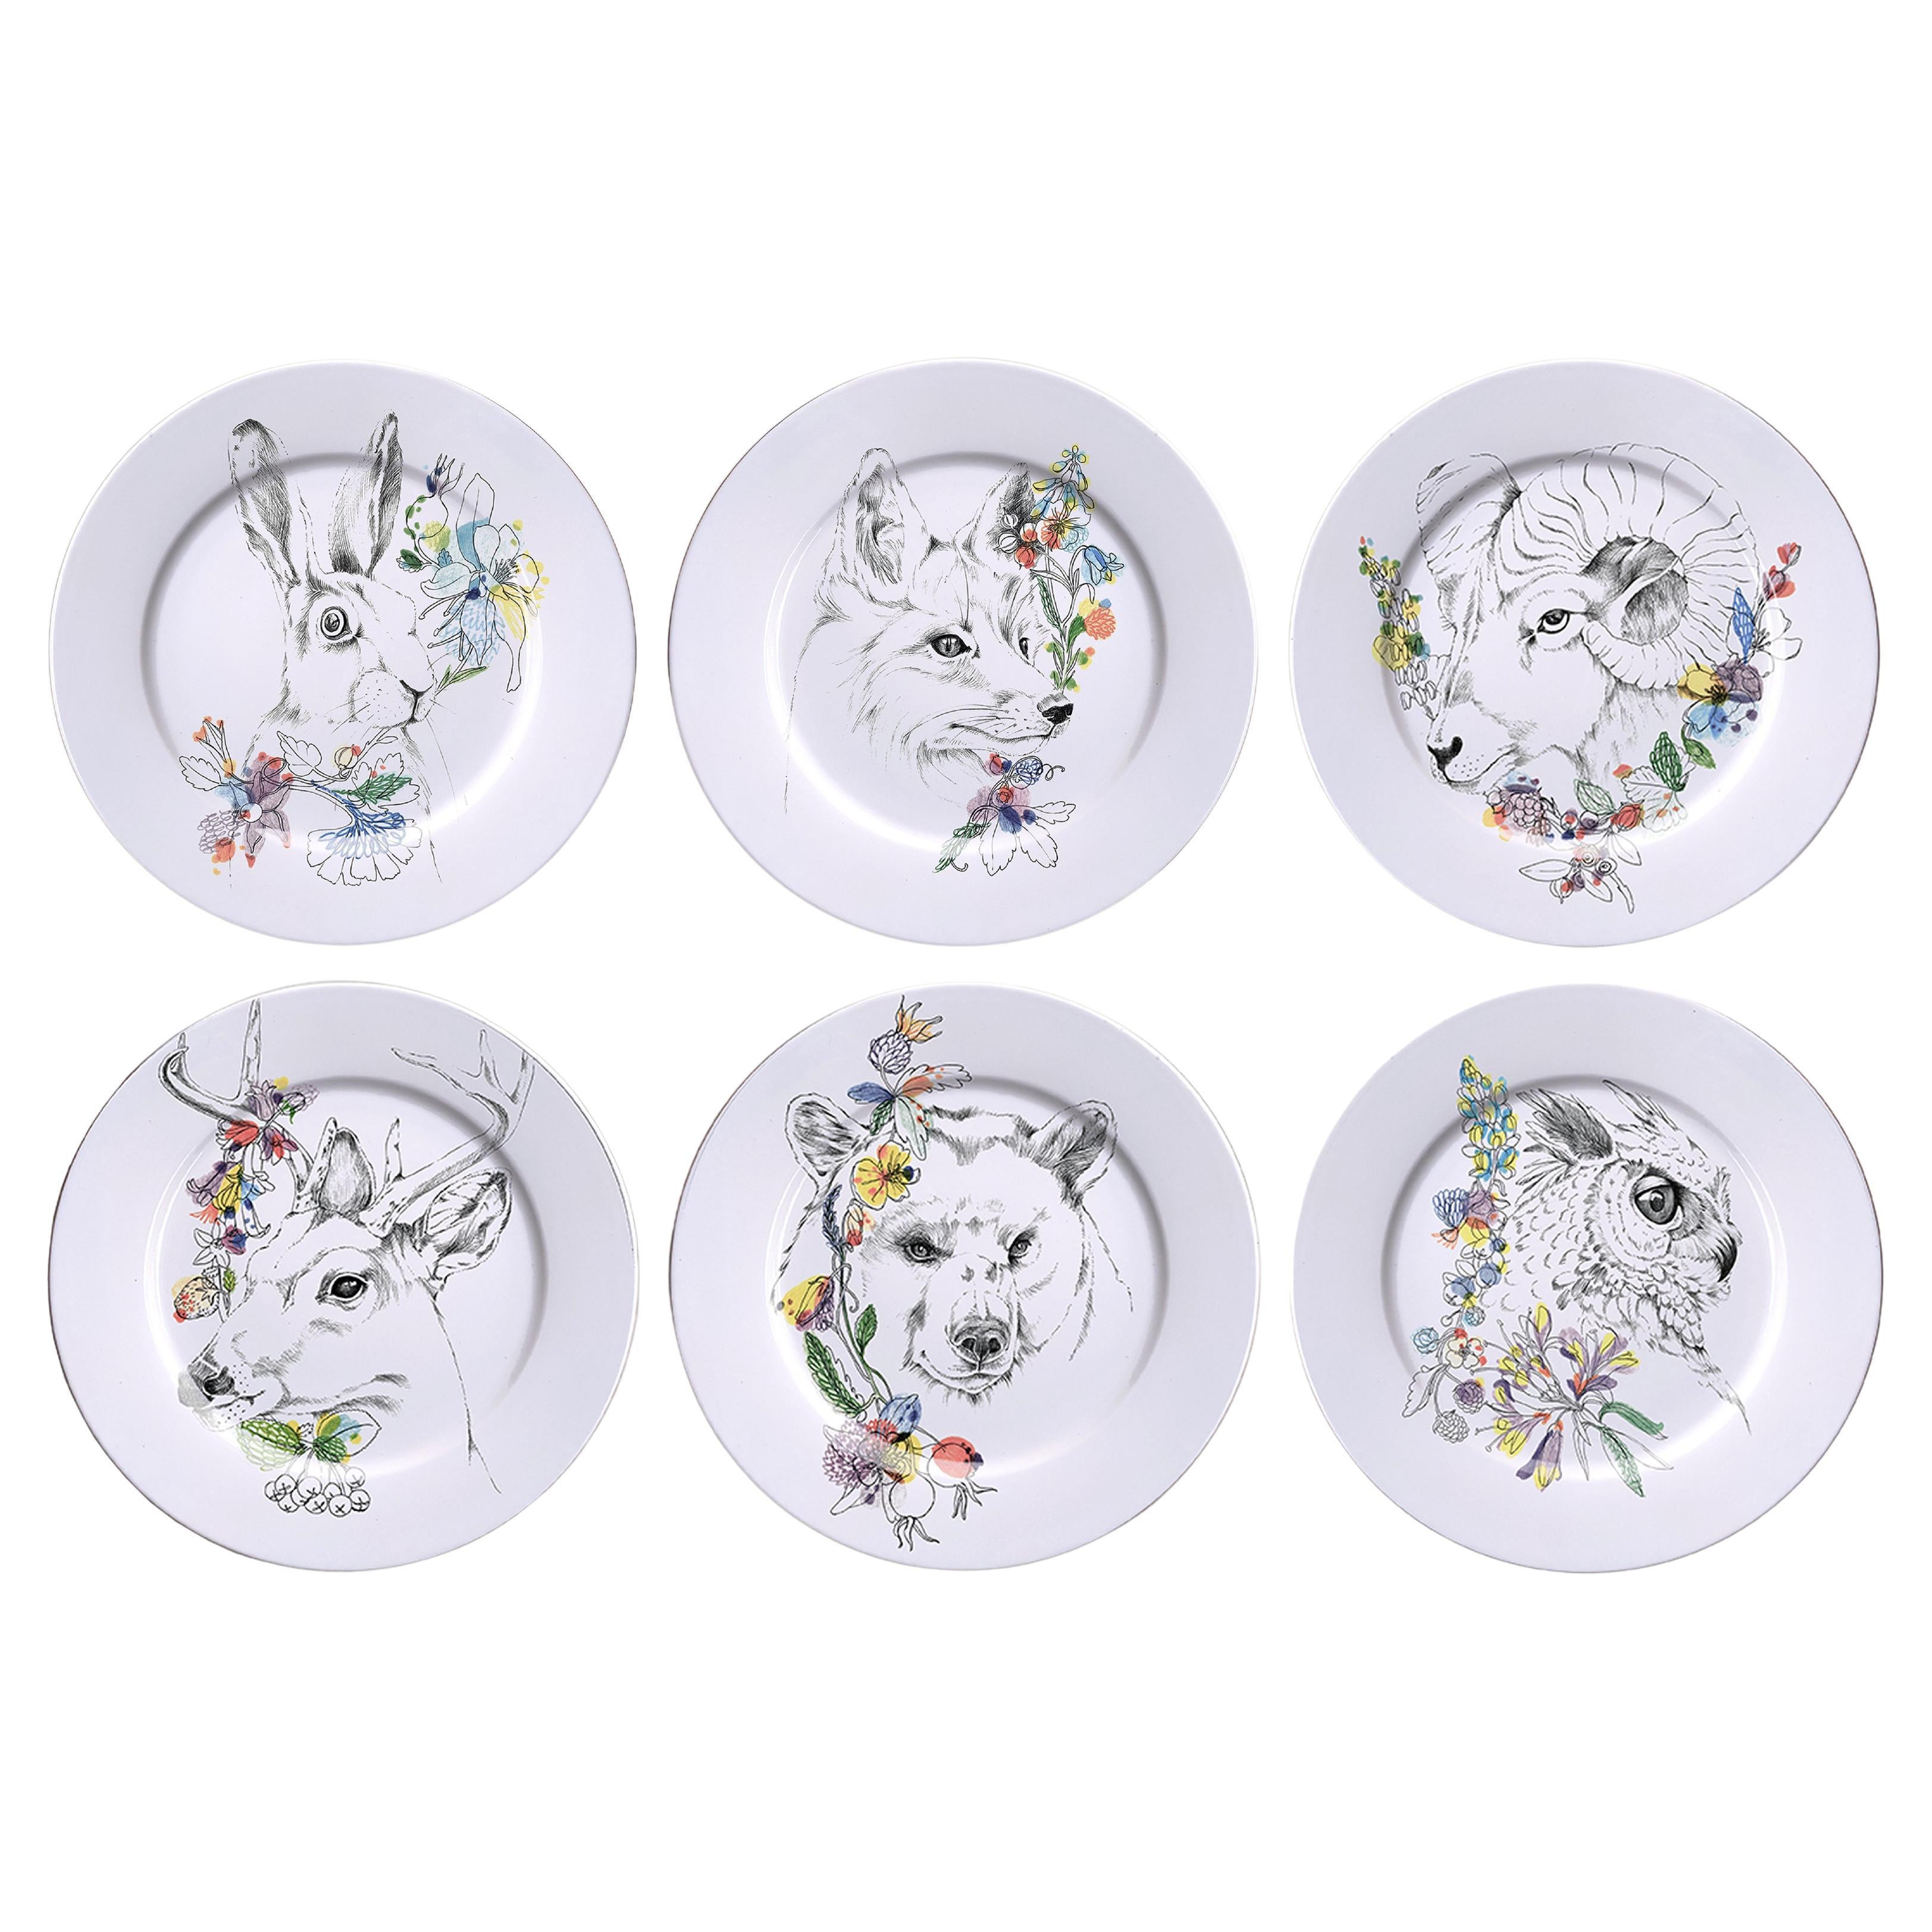 Ode to the Woods, Six Contemporary Porcelain Dinner Plates with Animals&Flowers For Sale